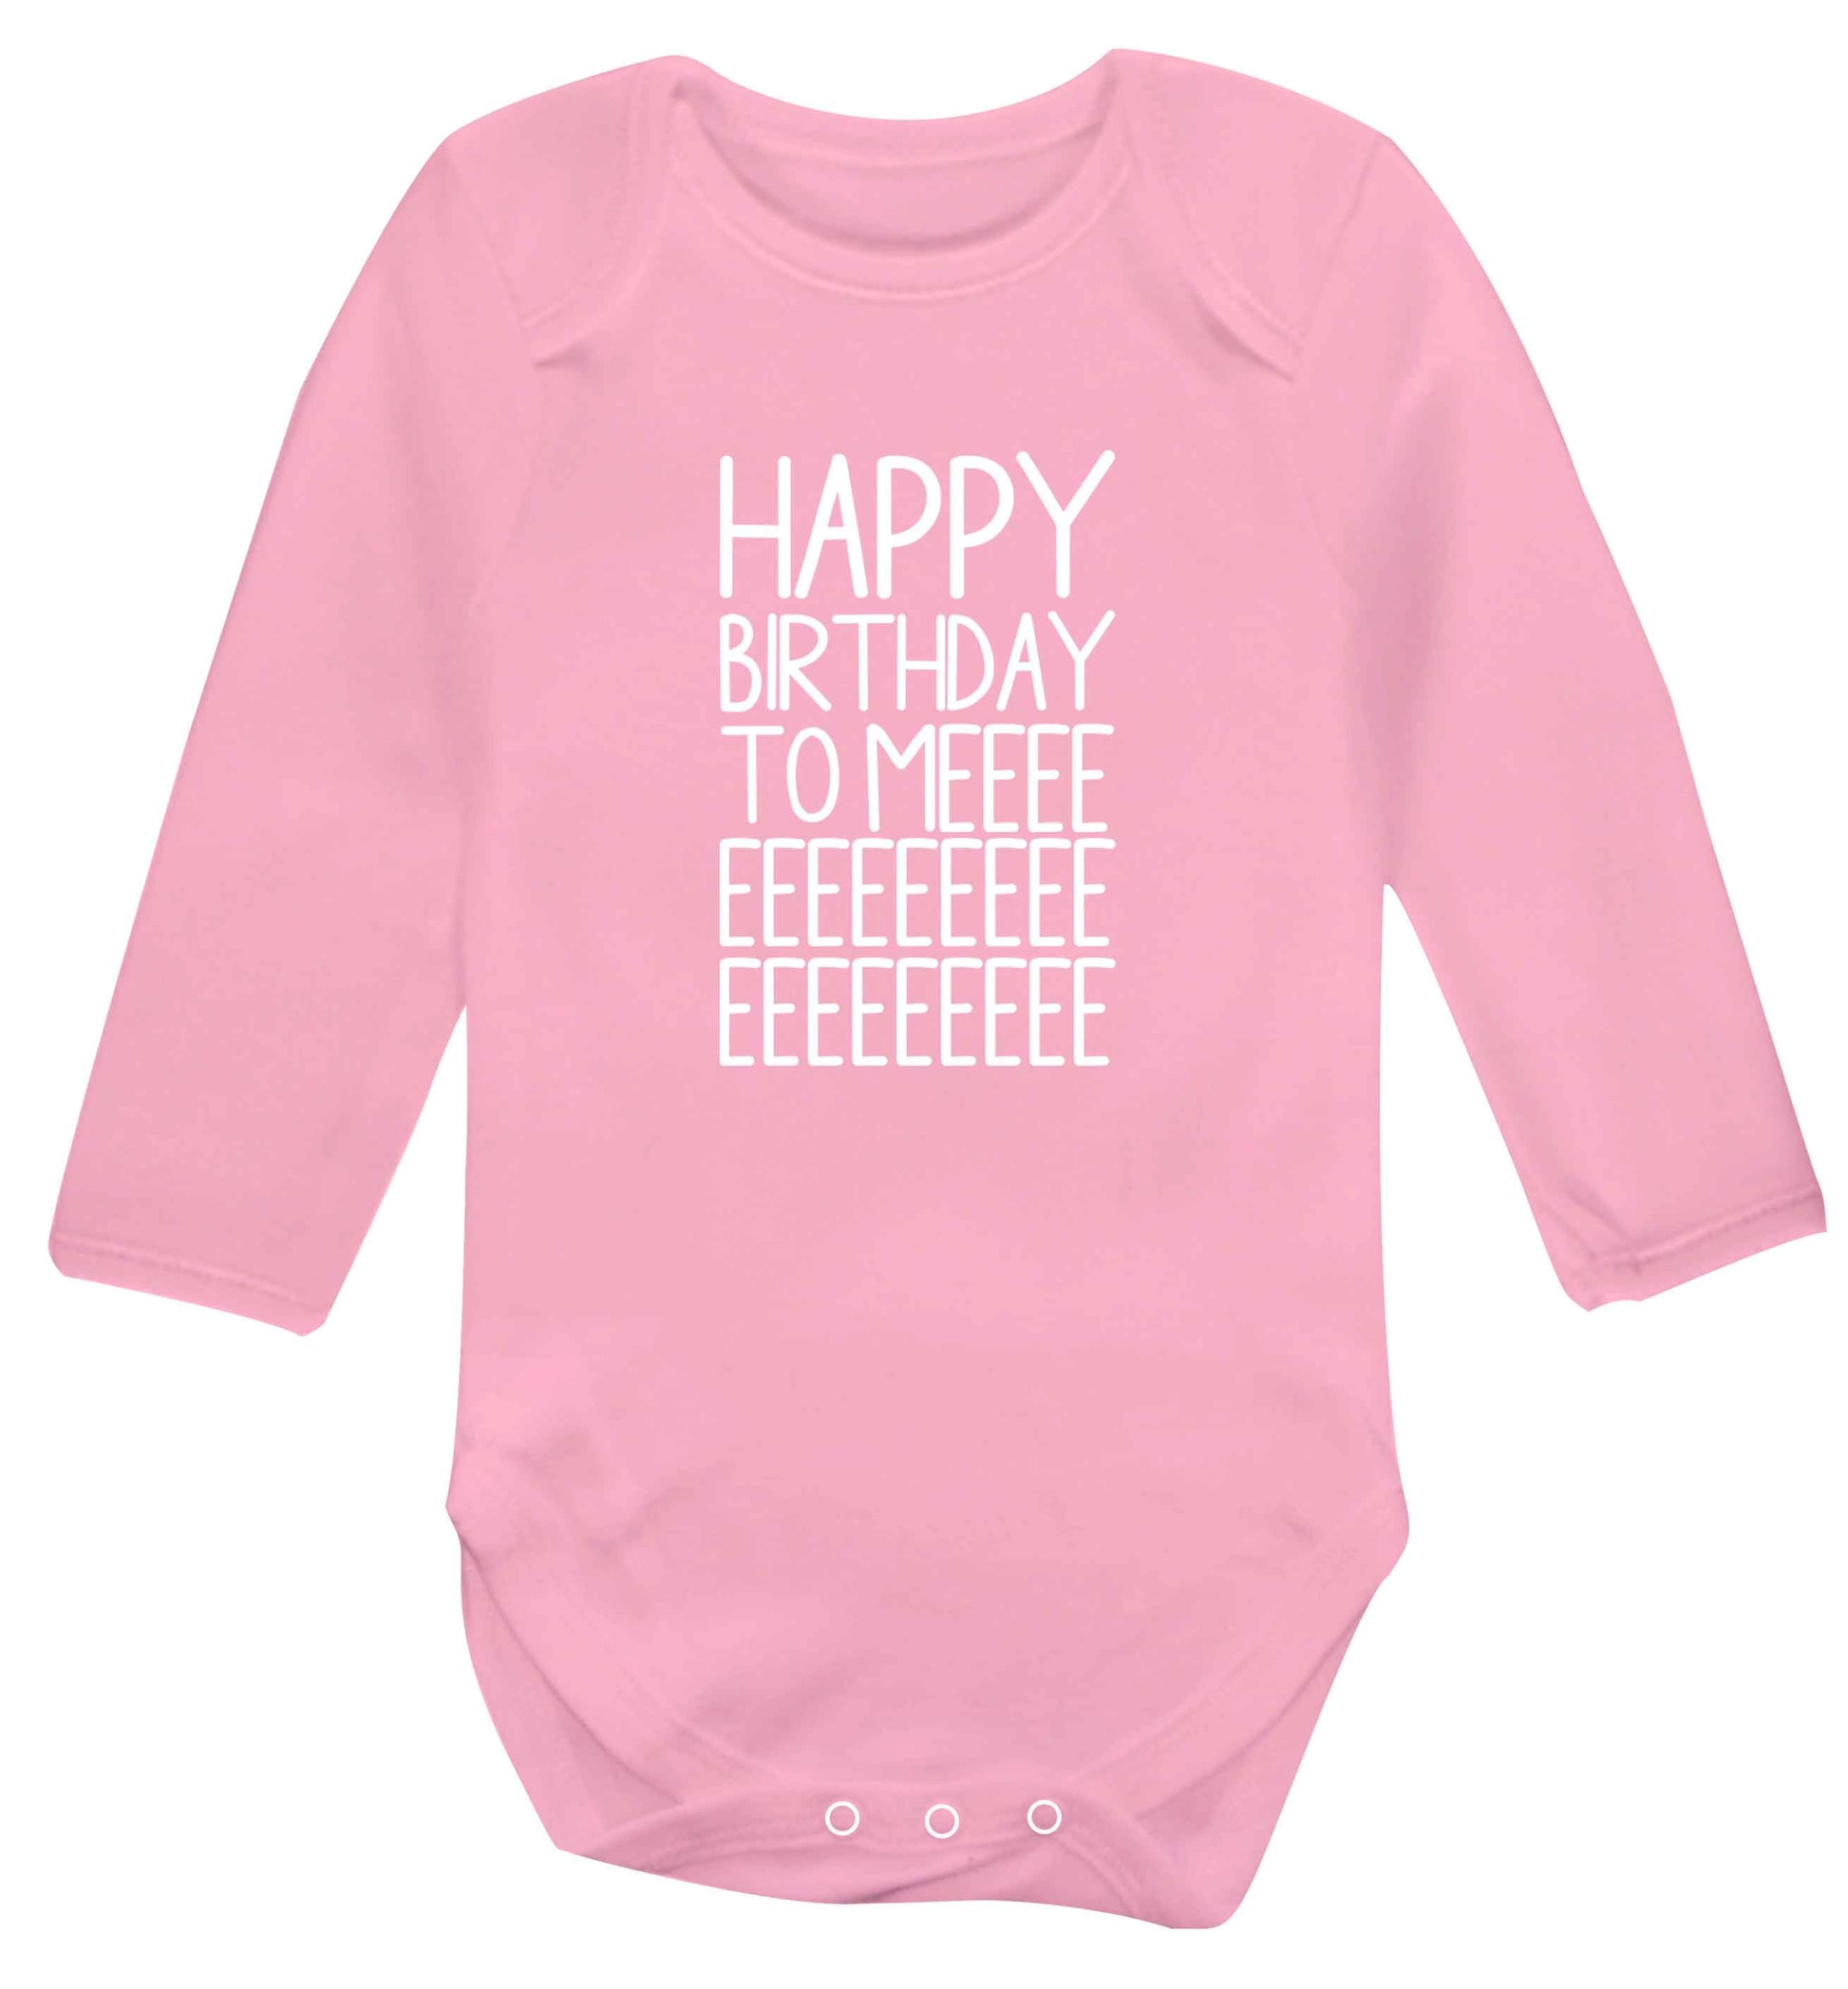 Happy birthday to me baby vest long sleeved pale pink 6-12 months